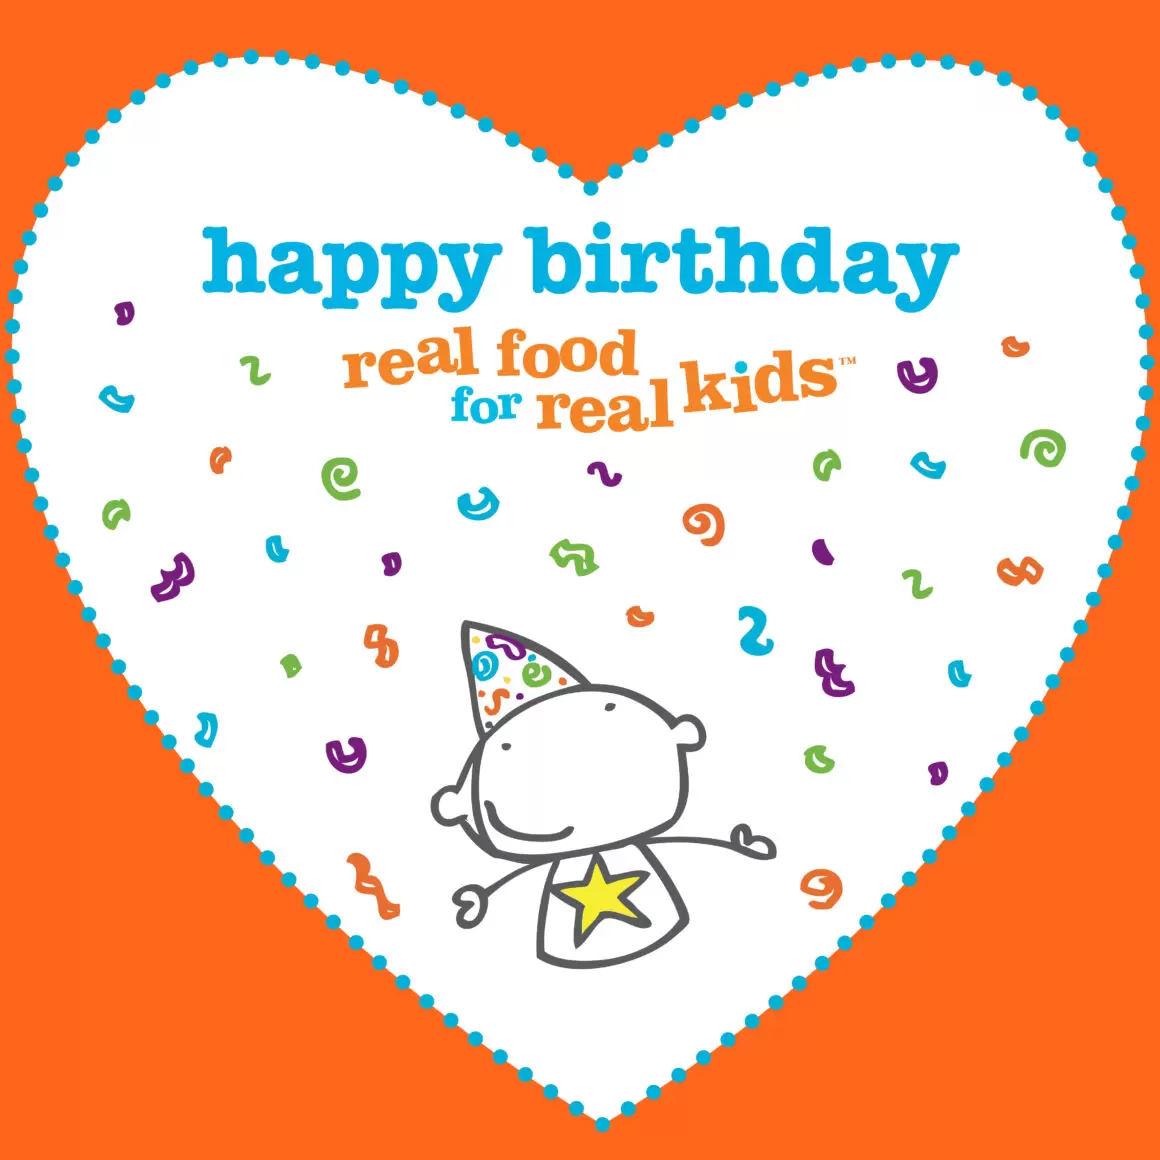 an illustration celebrating a happy 19th birthday to real food for real kids